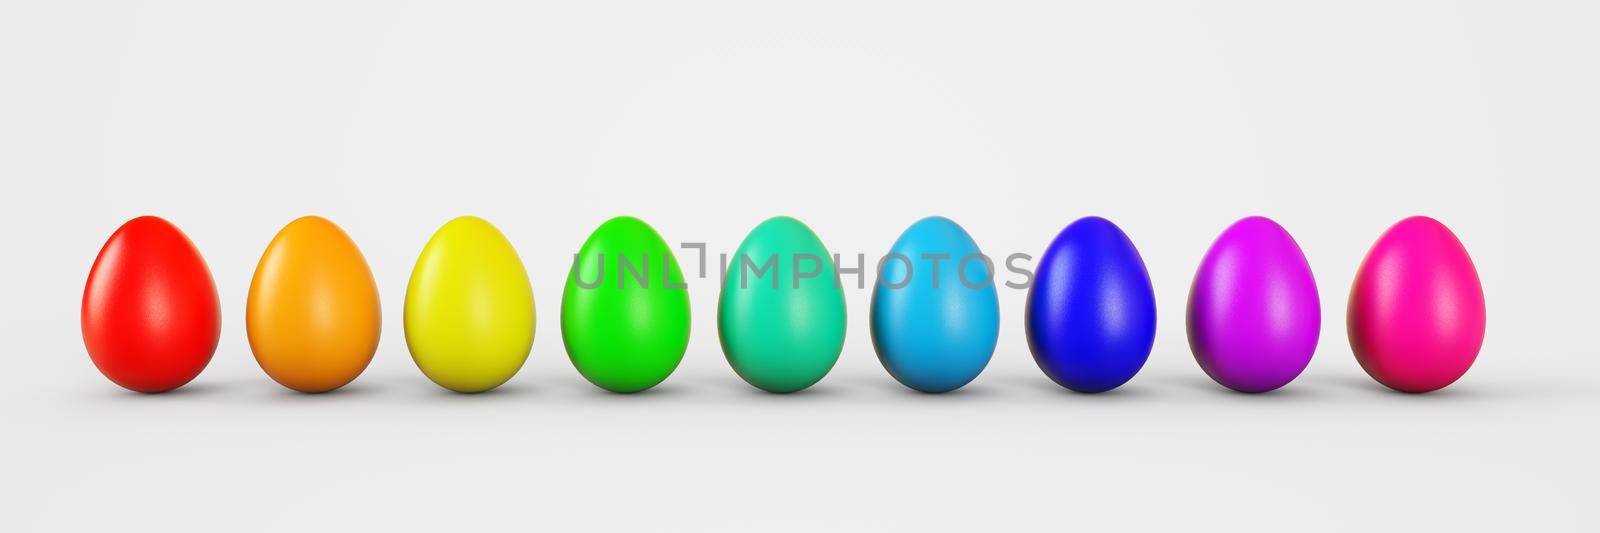 Set of Colorful Realistic Easter Eggs isolated on white background. Glossy Shiny Eggs. 3D rendering illustration.